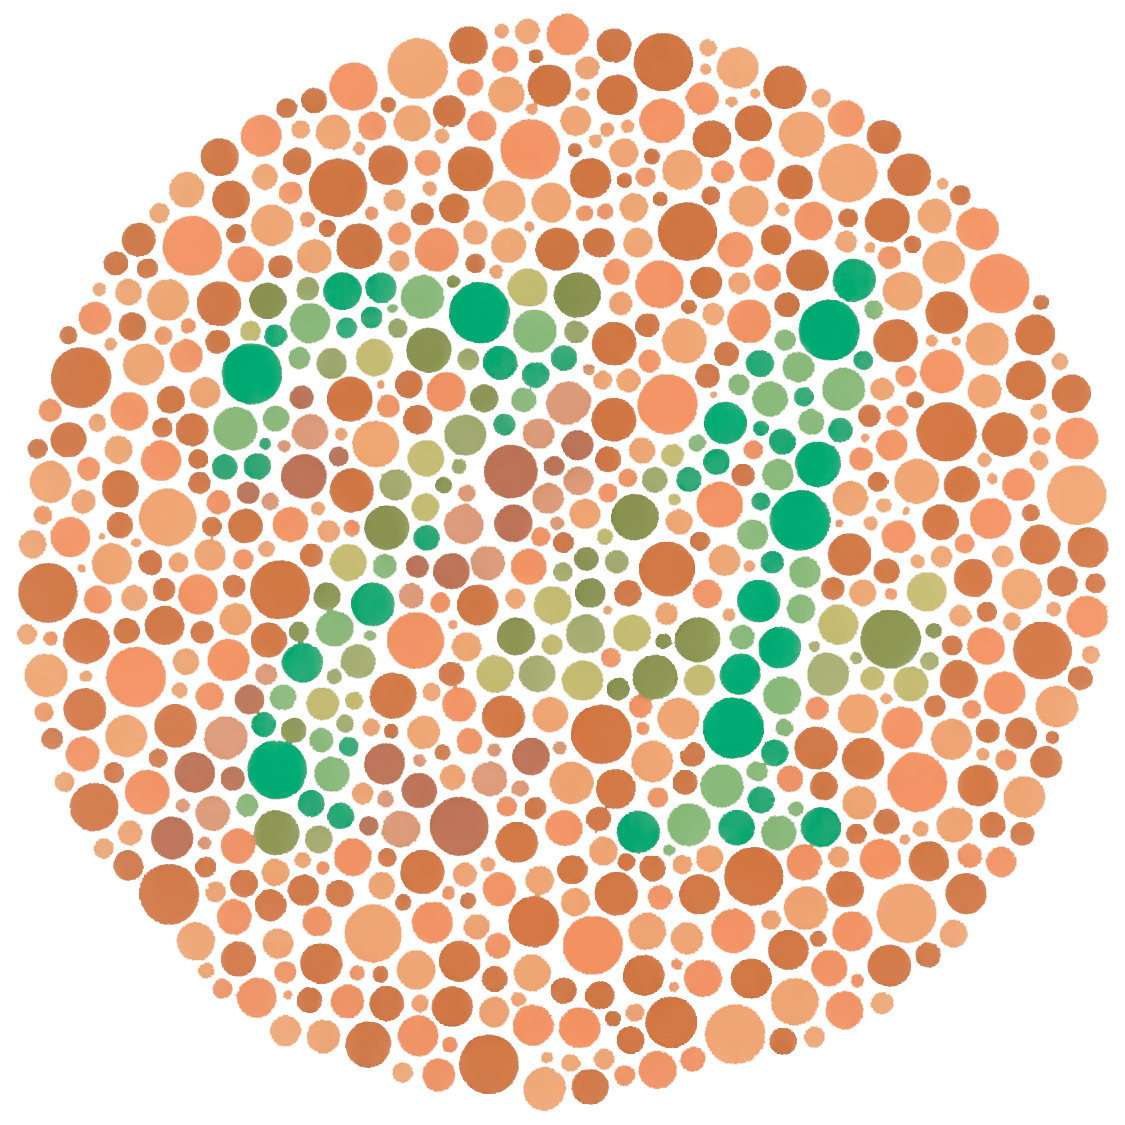 Ishihara Test for Color Blindness